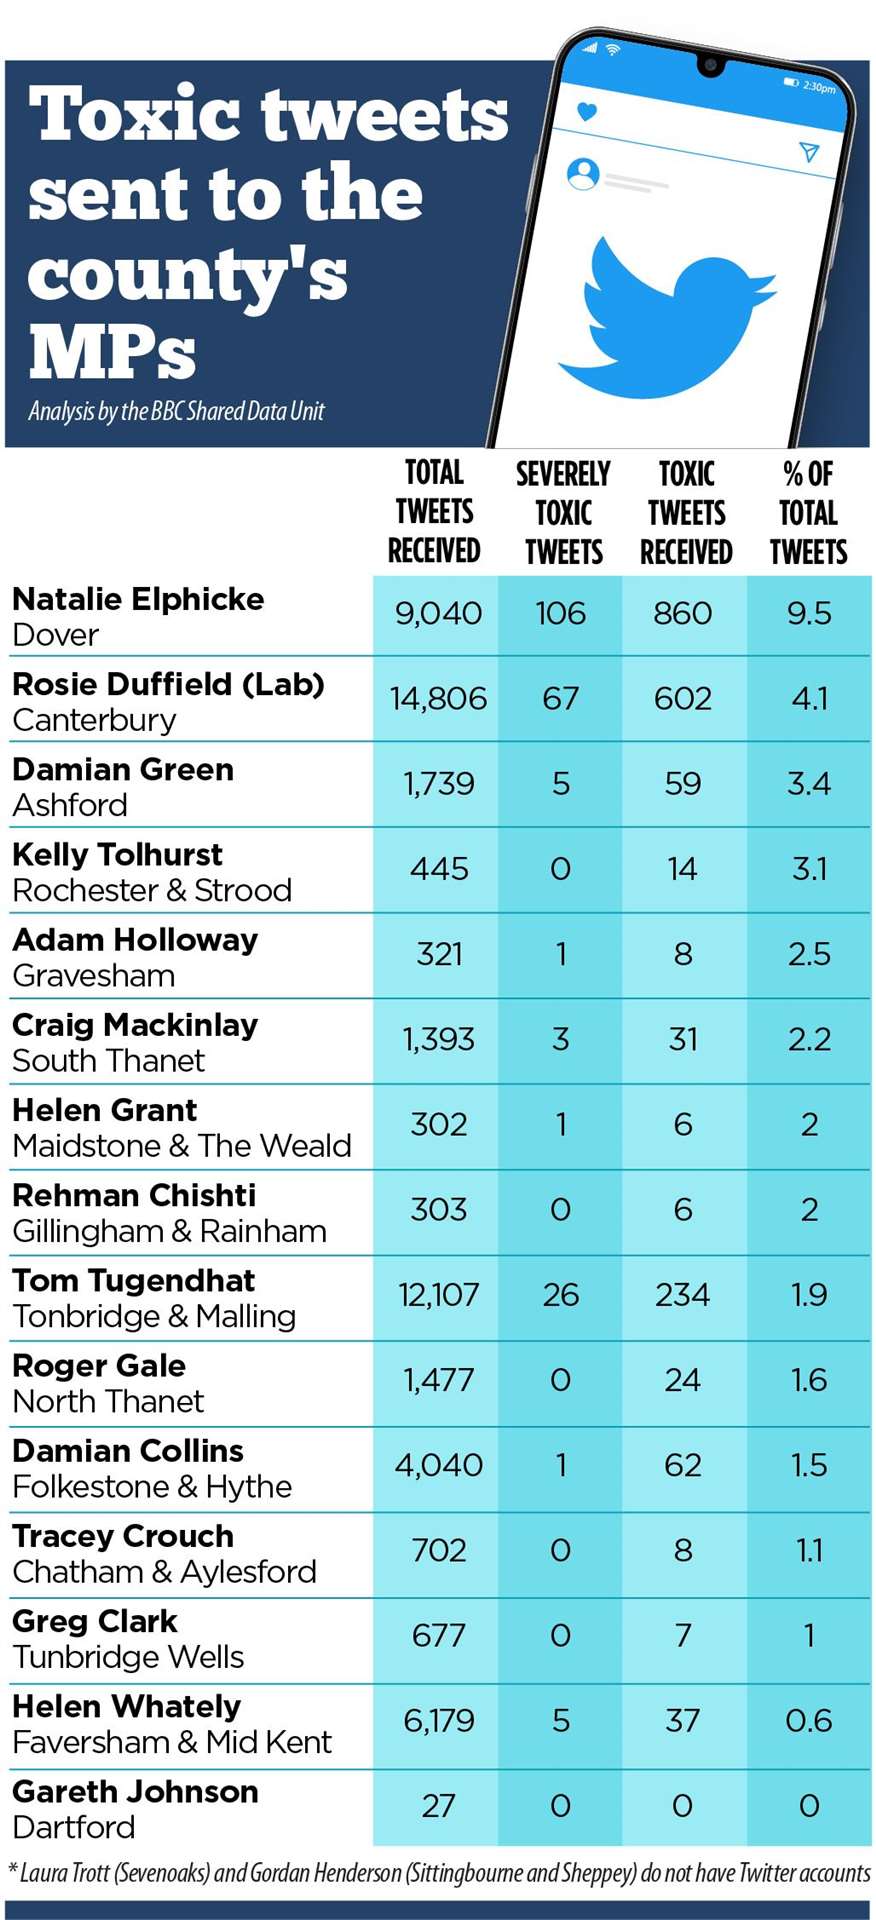 The analysis reveals which Kent MPs are mentioned in the most 'toxic' tweets